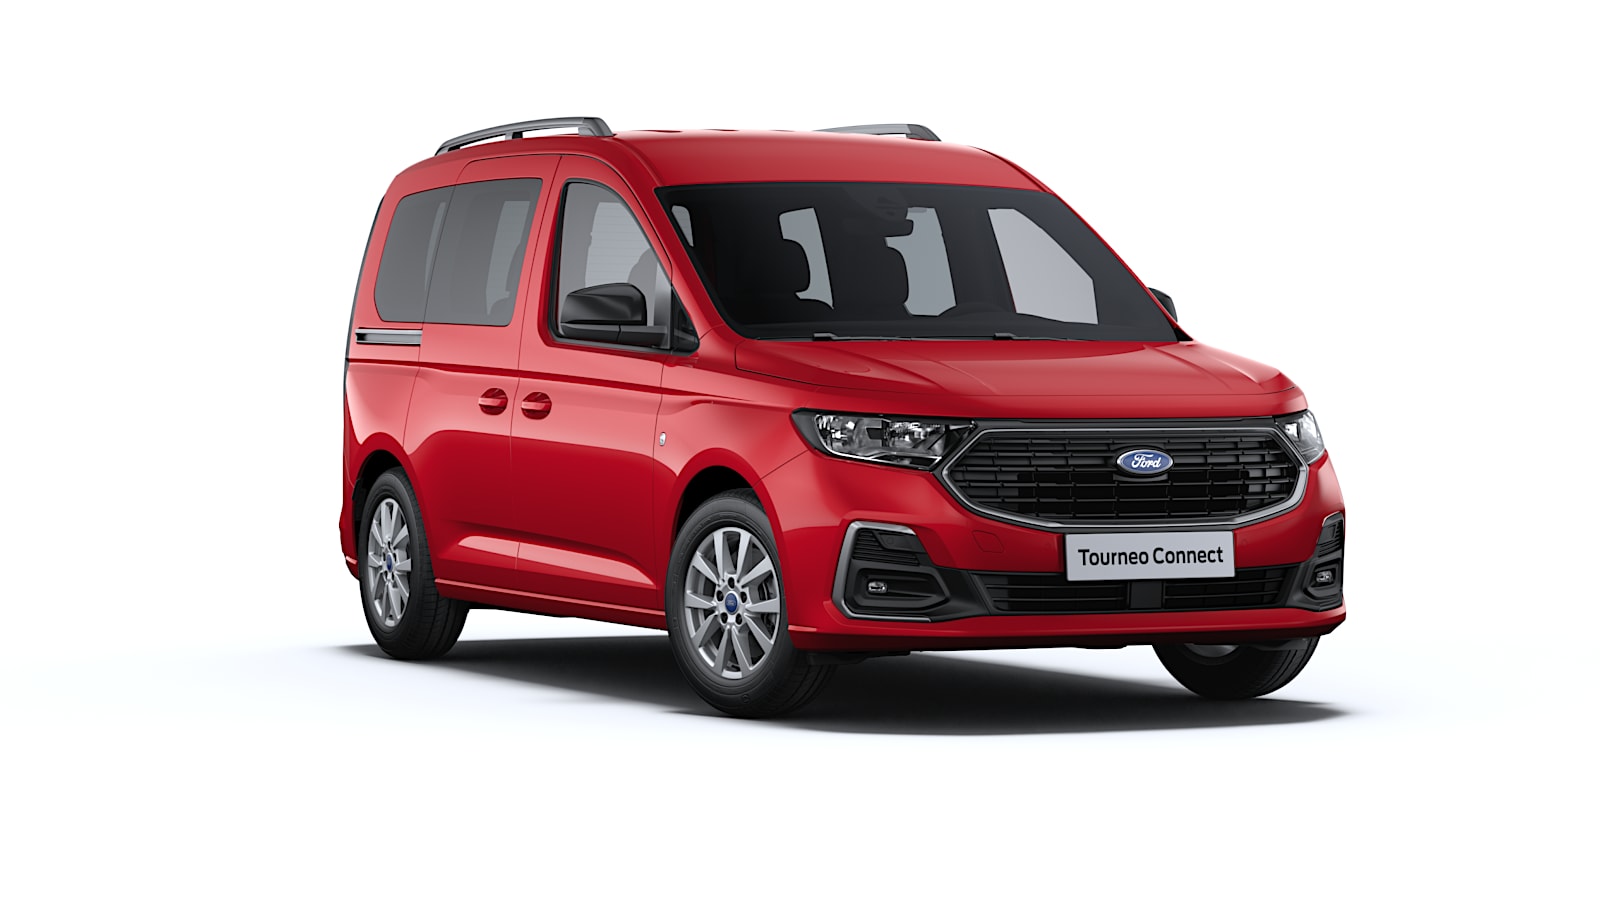 Ford Tourneo Connect in Rot ¾-Frontansicht